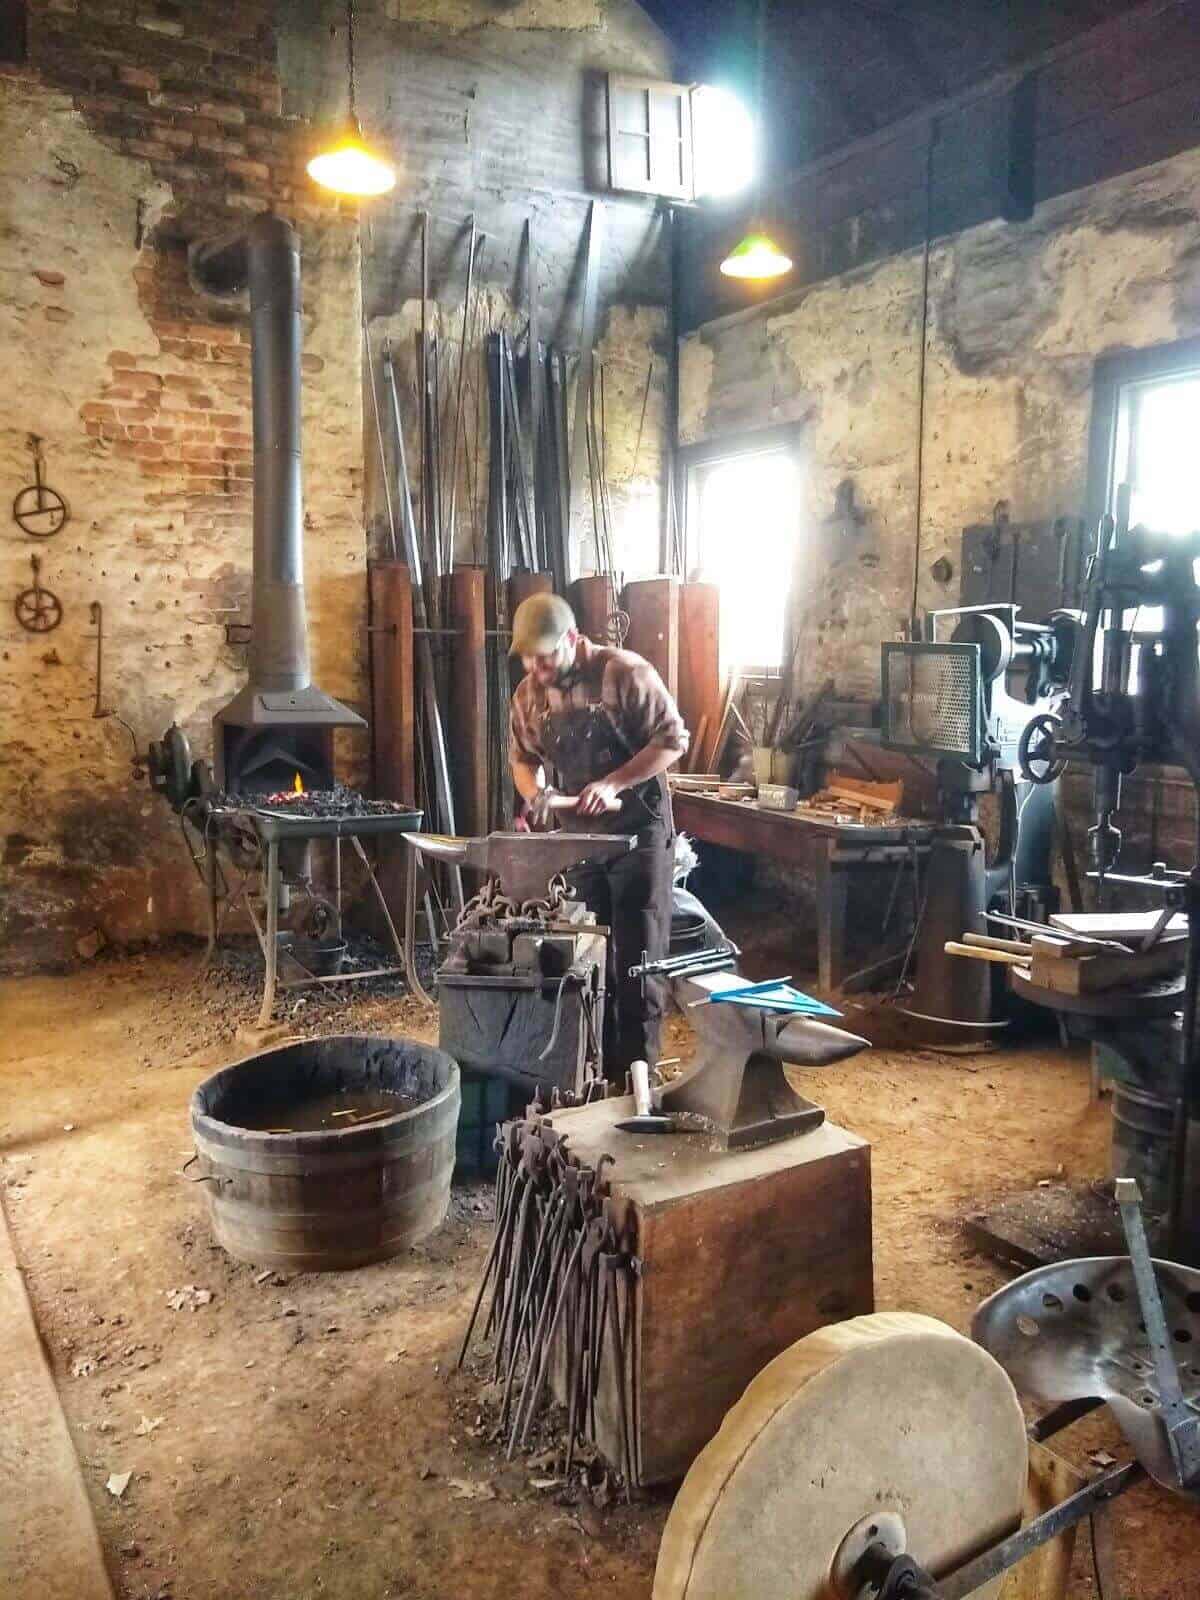 Blacksmith demonstrating with an anvil